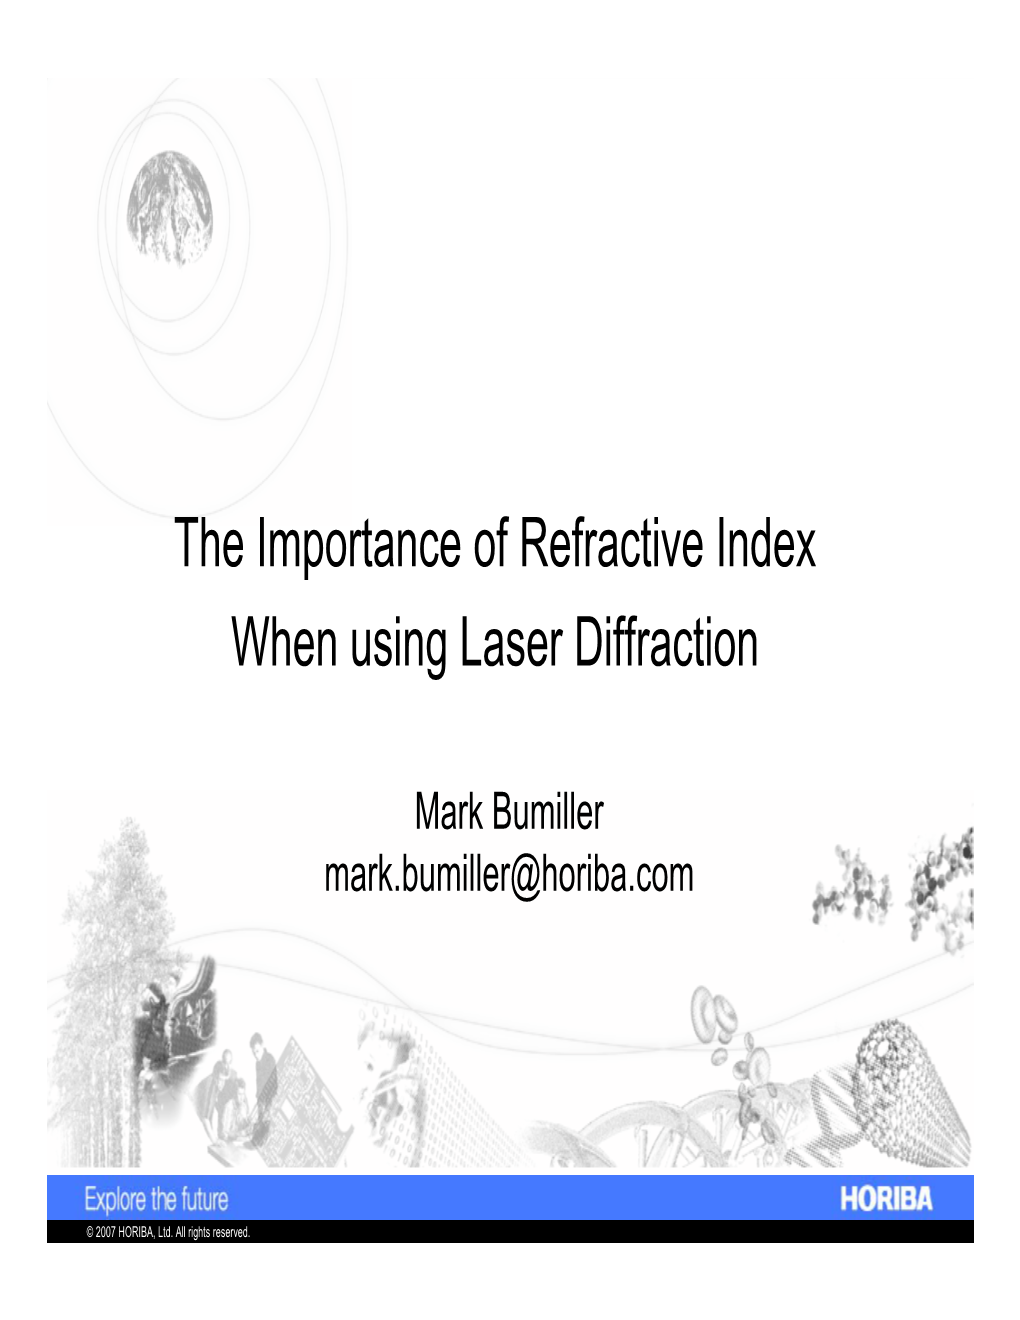 The Importance of Refractive Index When Using Laser Diffraction